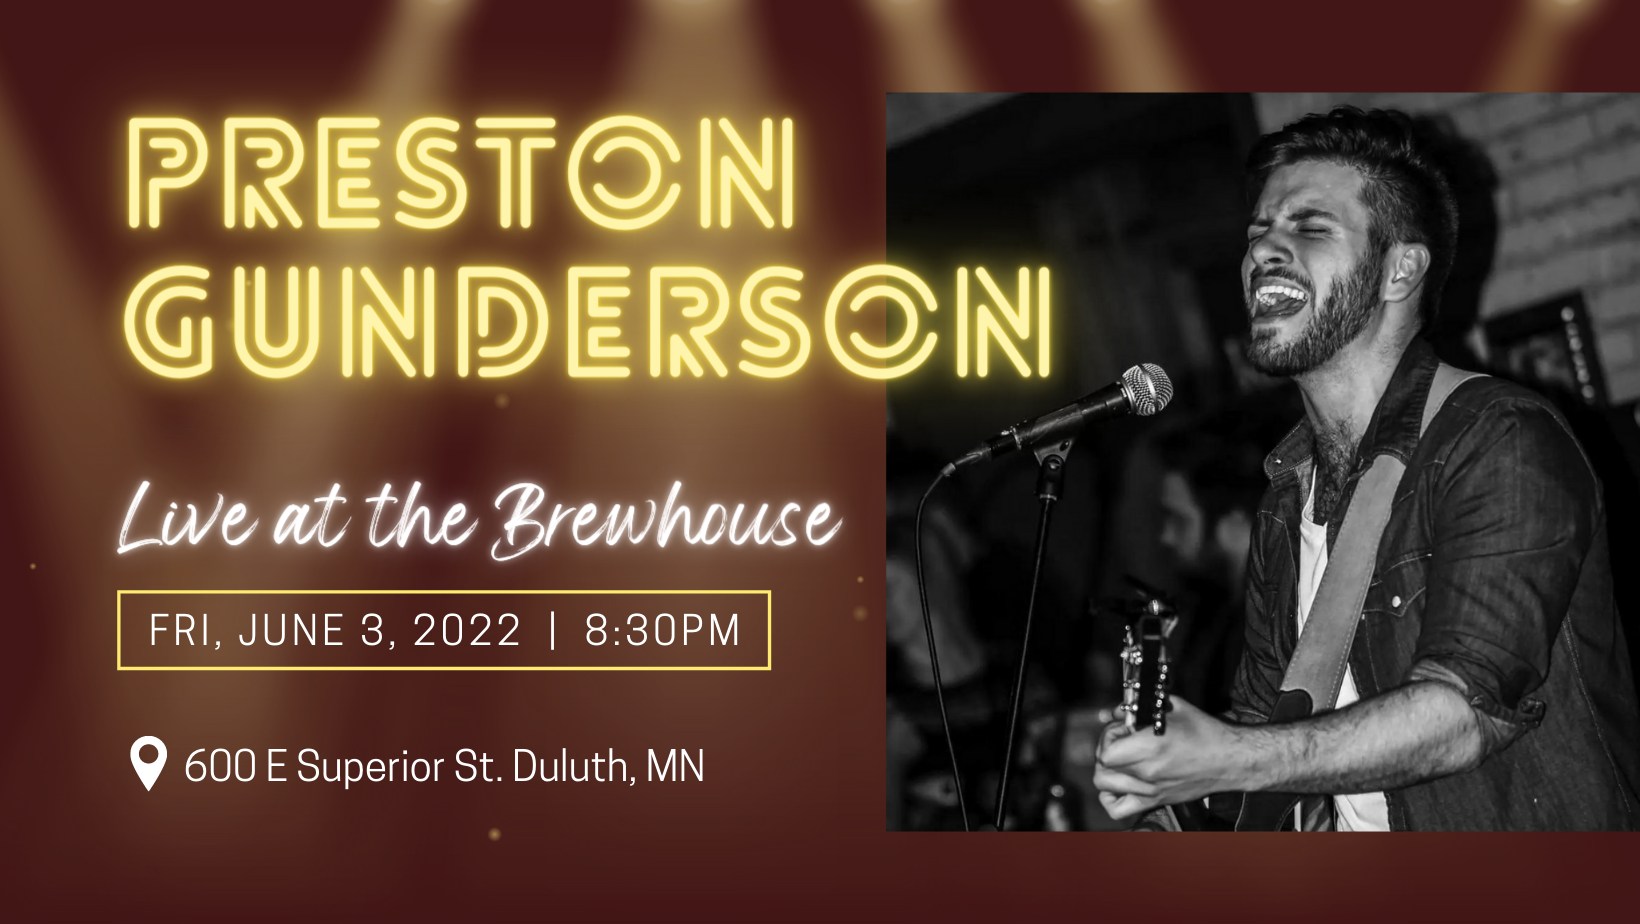 Preston Gunderson Live at the Brewhouse